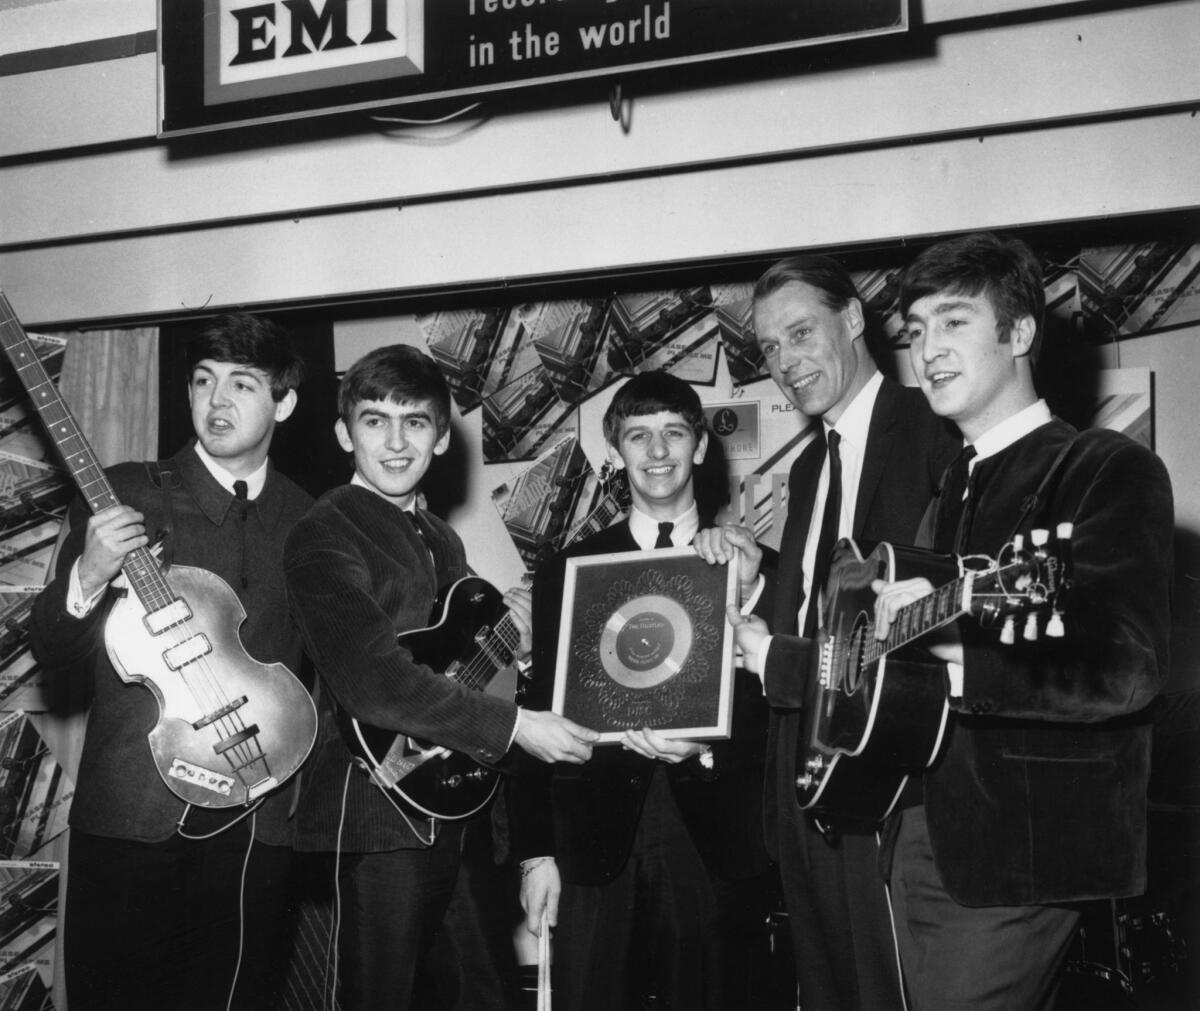 Beatles producer George Martin, second from right, stands with the group as they hold a silver disc marking their record sales in April 1963.